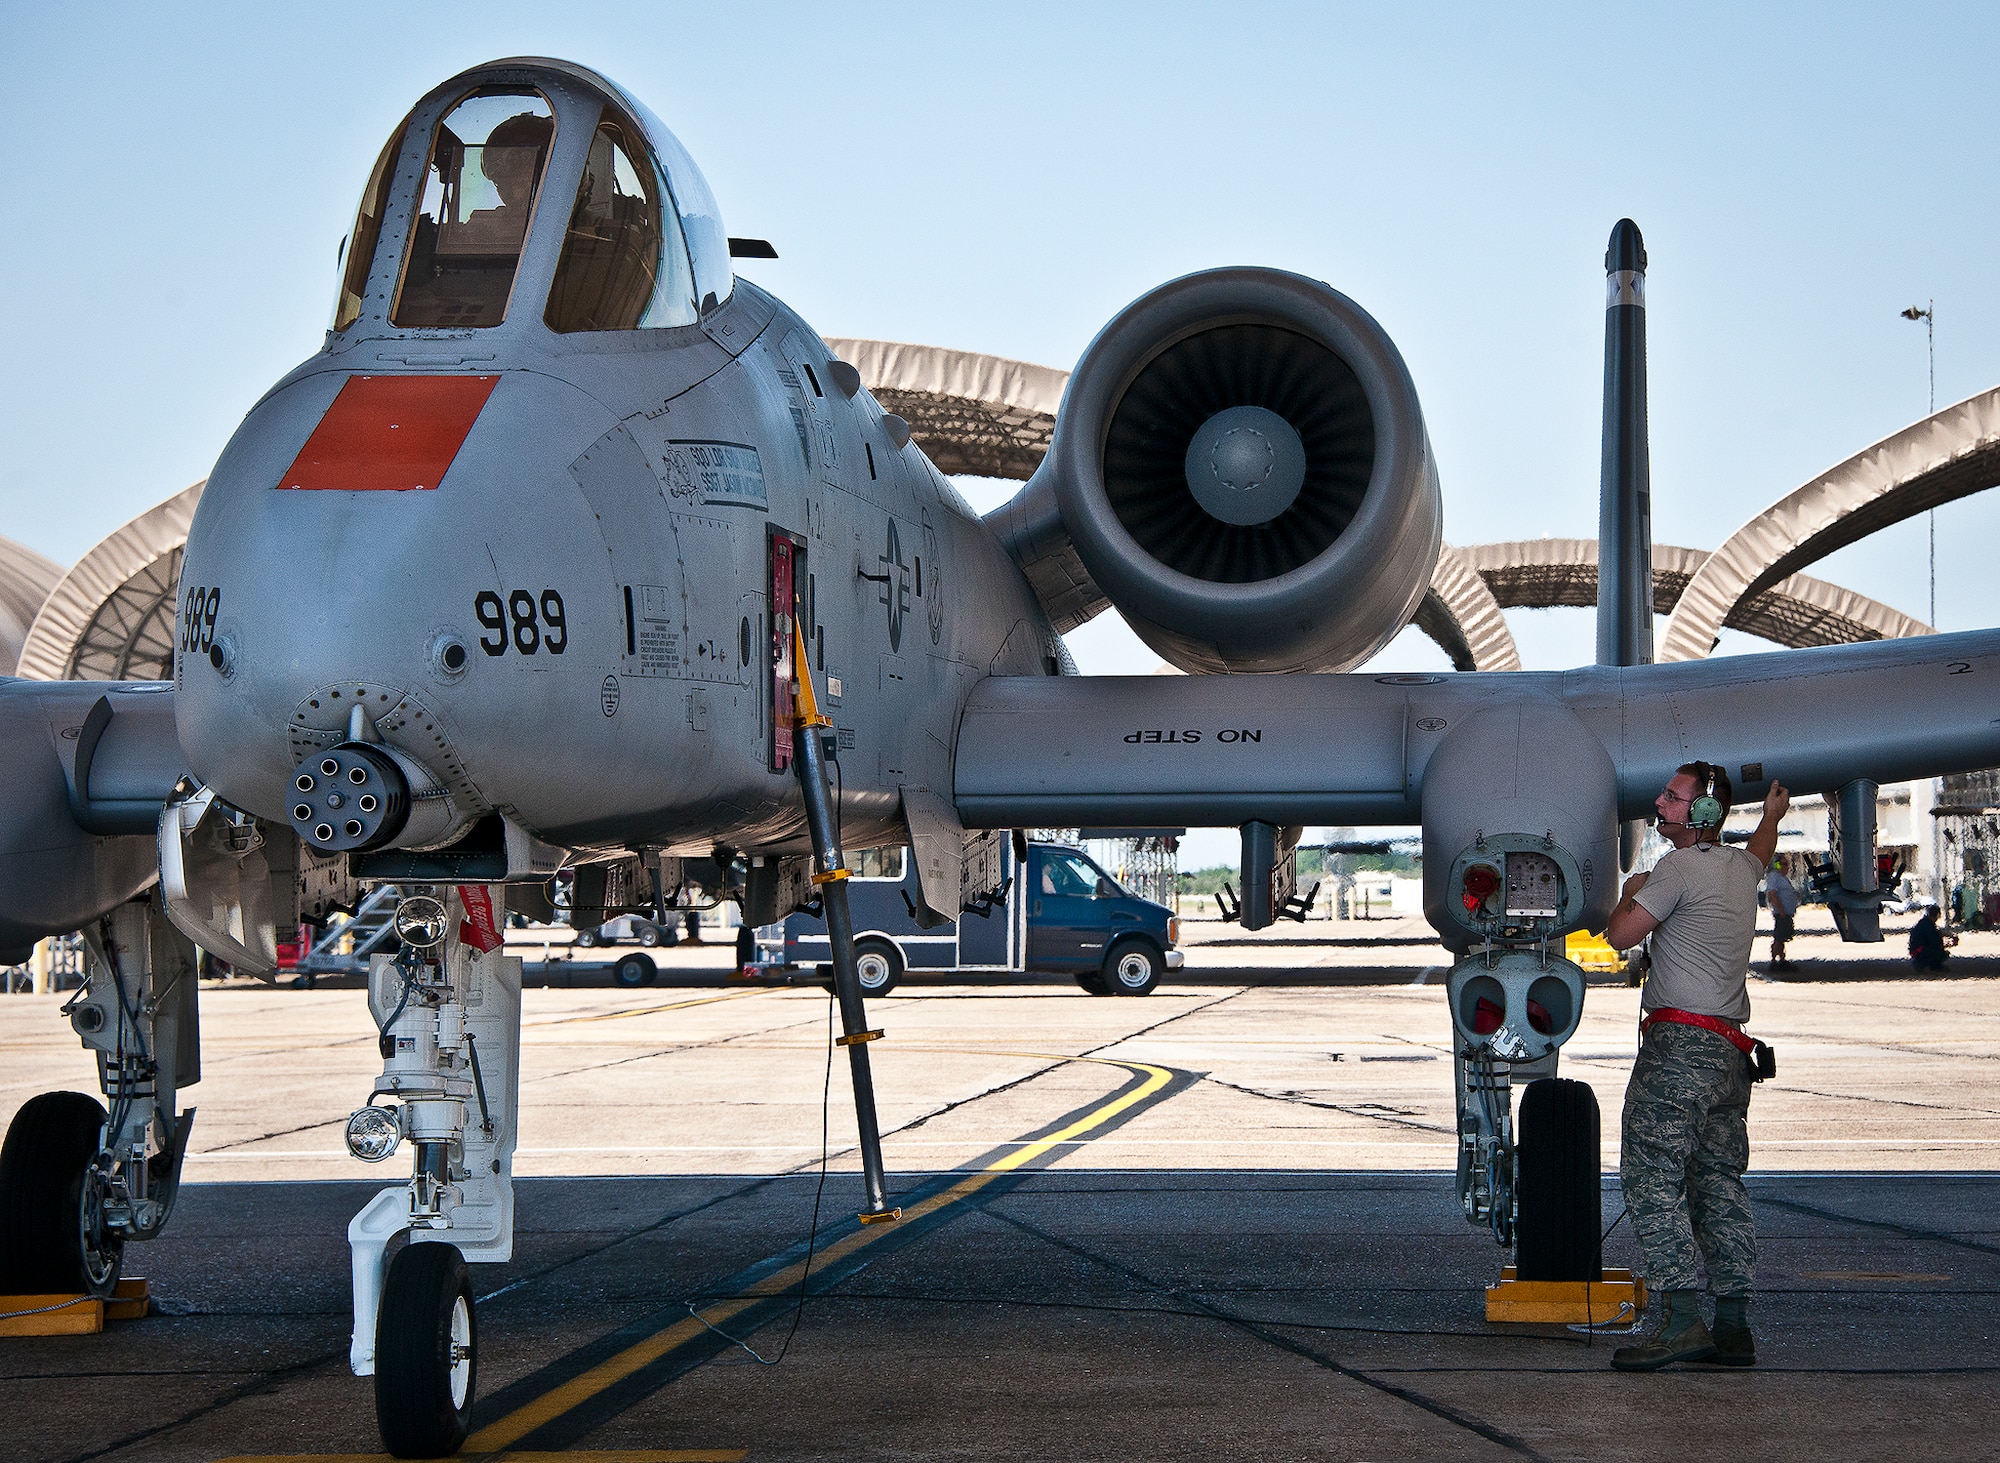 Senior Airman Mitchell Harrington, of the 46th Aircraft Maintenance Squadron, goes over last minute checks before sending the A-10 on its first flight using an alcohol-derived fuel blend June 28 at Eglin Air Force Base, Fla.  (U.S. Air Force photo/Samuel King Jr.)
 